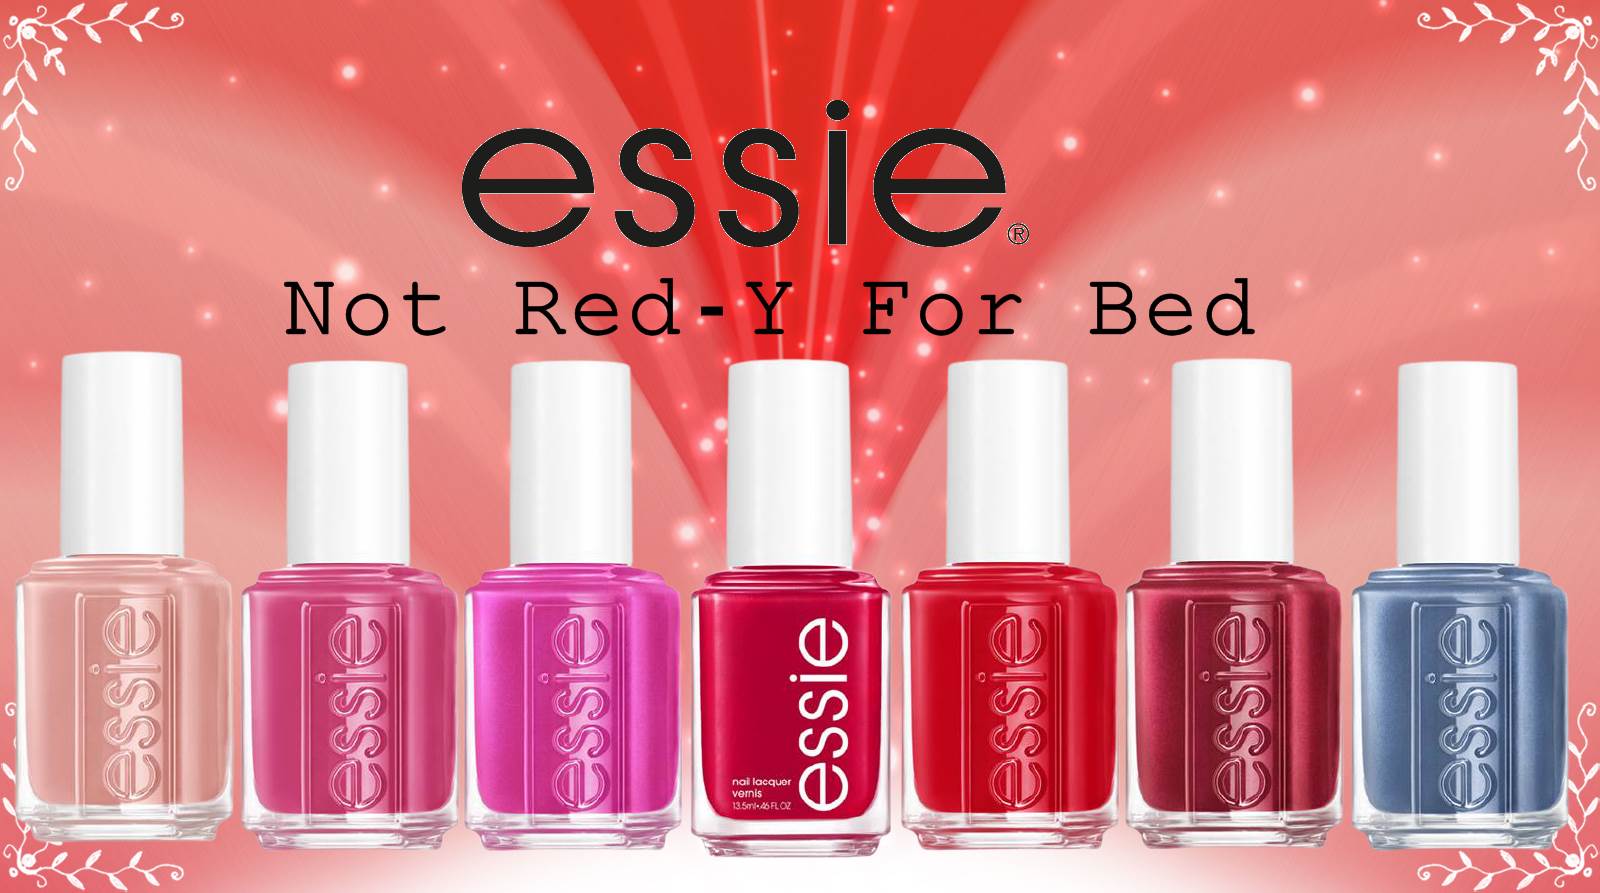 & Images Essie Nail Review Bed – Essie Not For Red-y Polish Collection